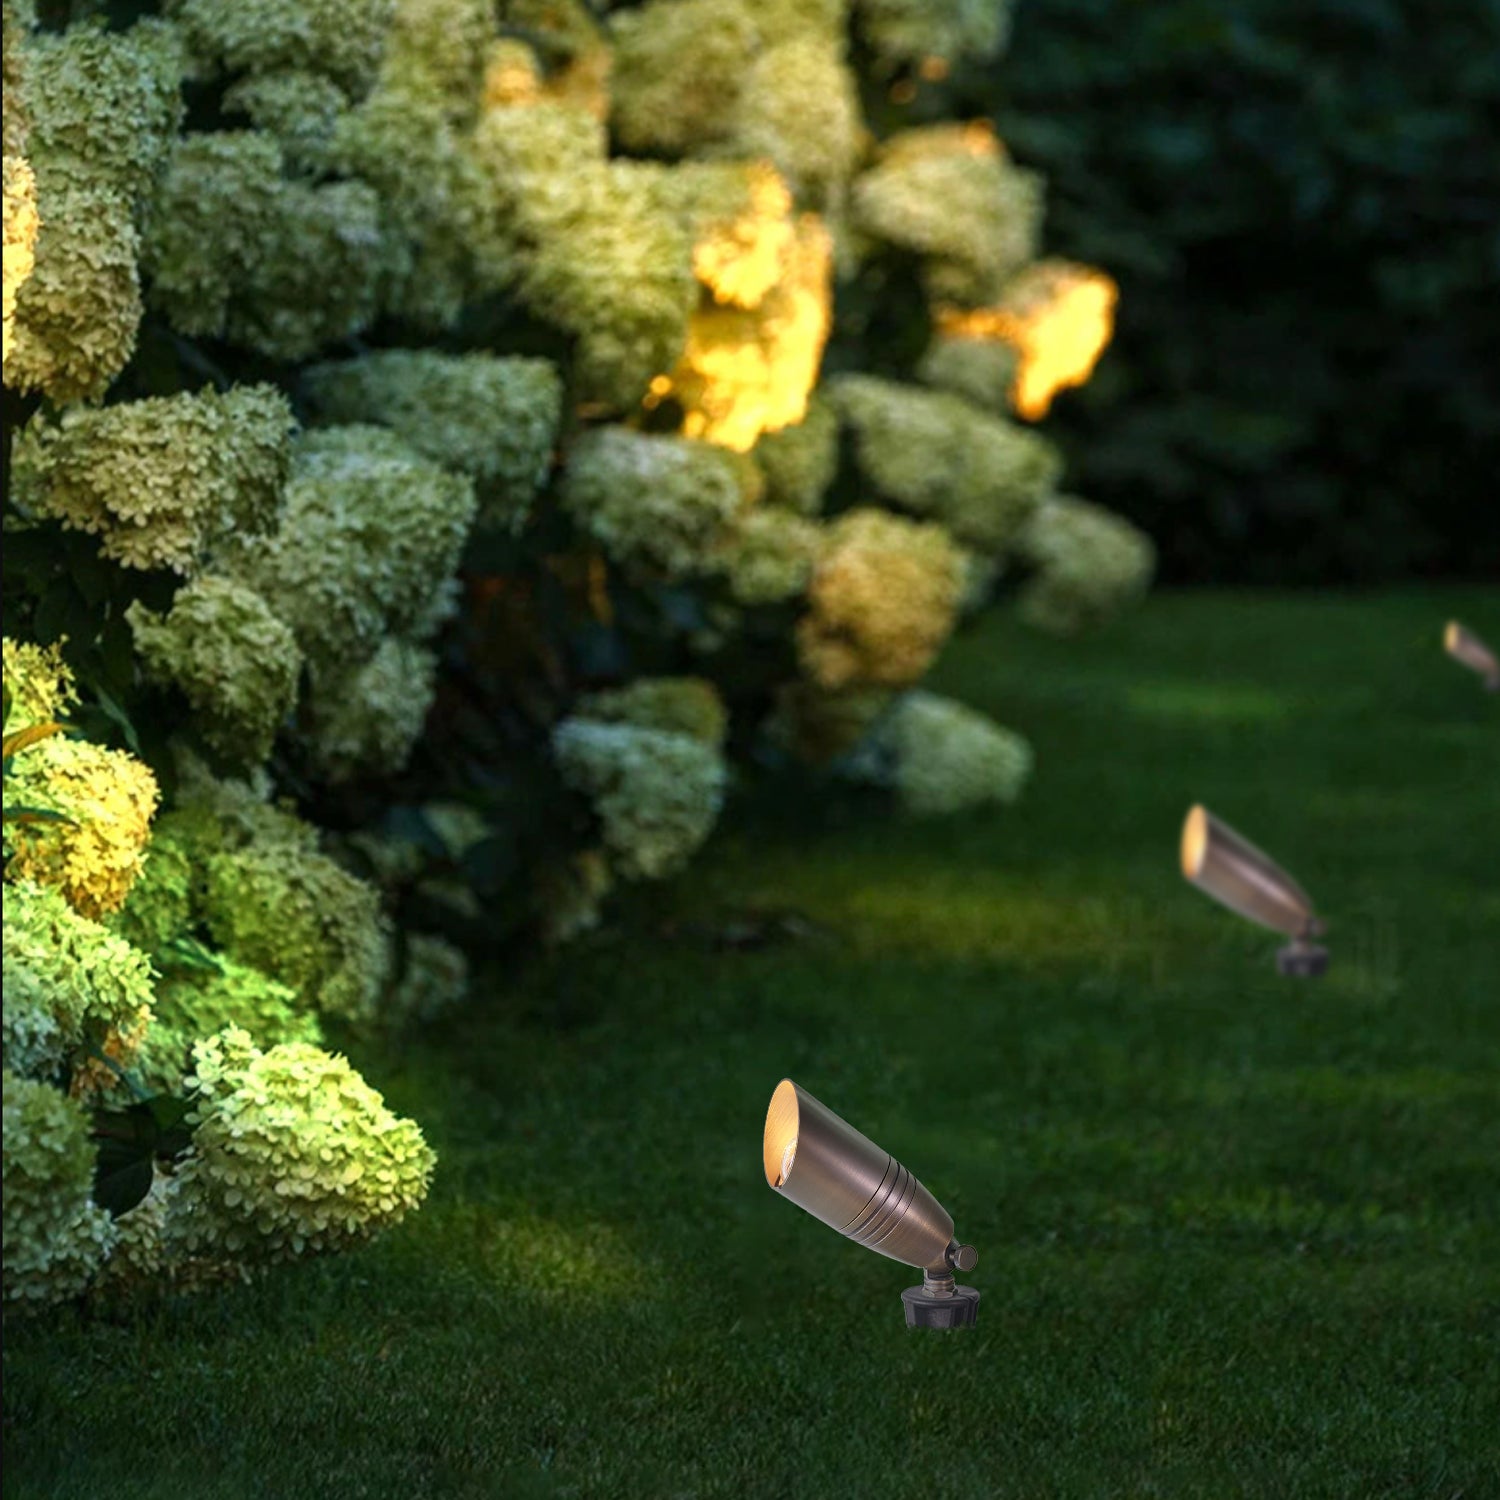 LED spotlights illuminating garden bushes at night, highlighting the landscape with a warm glow.